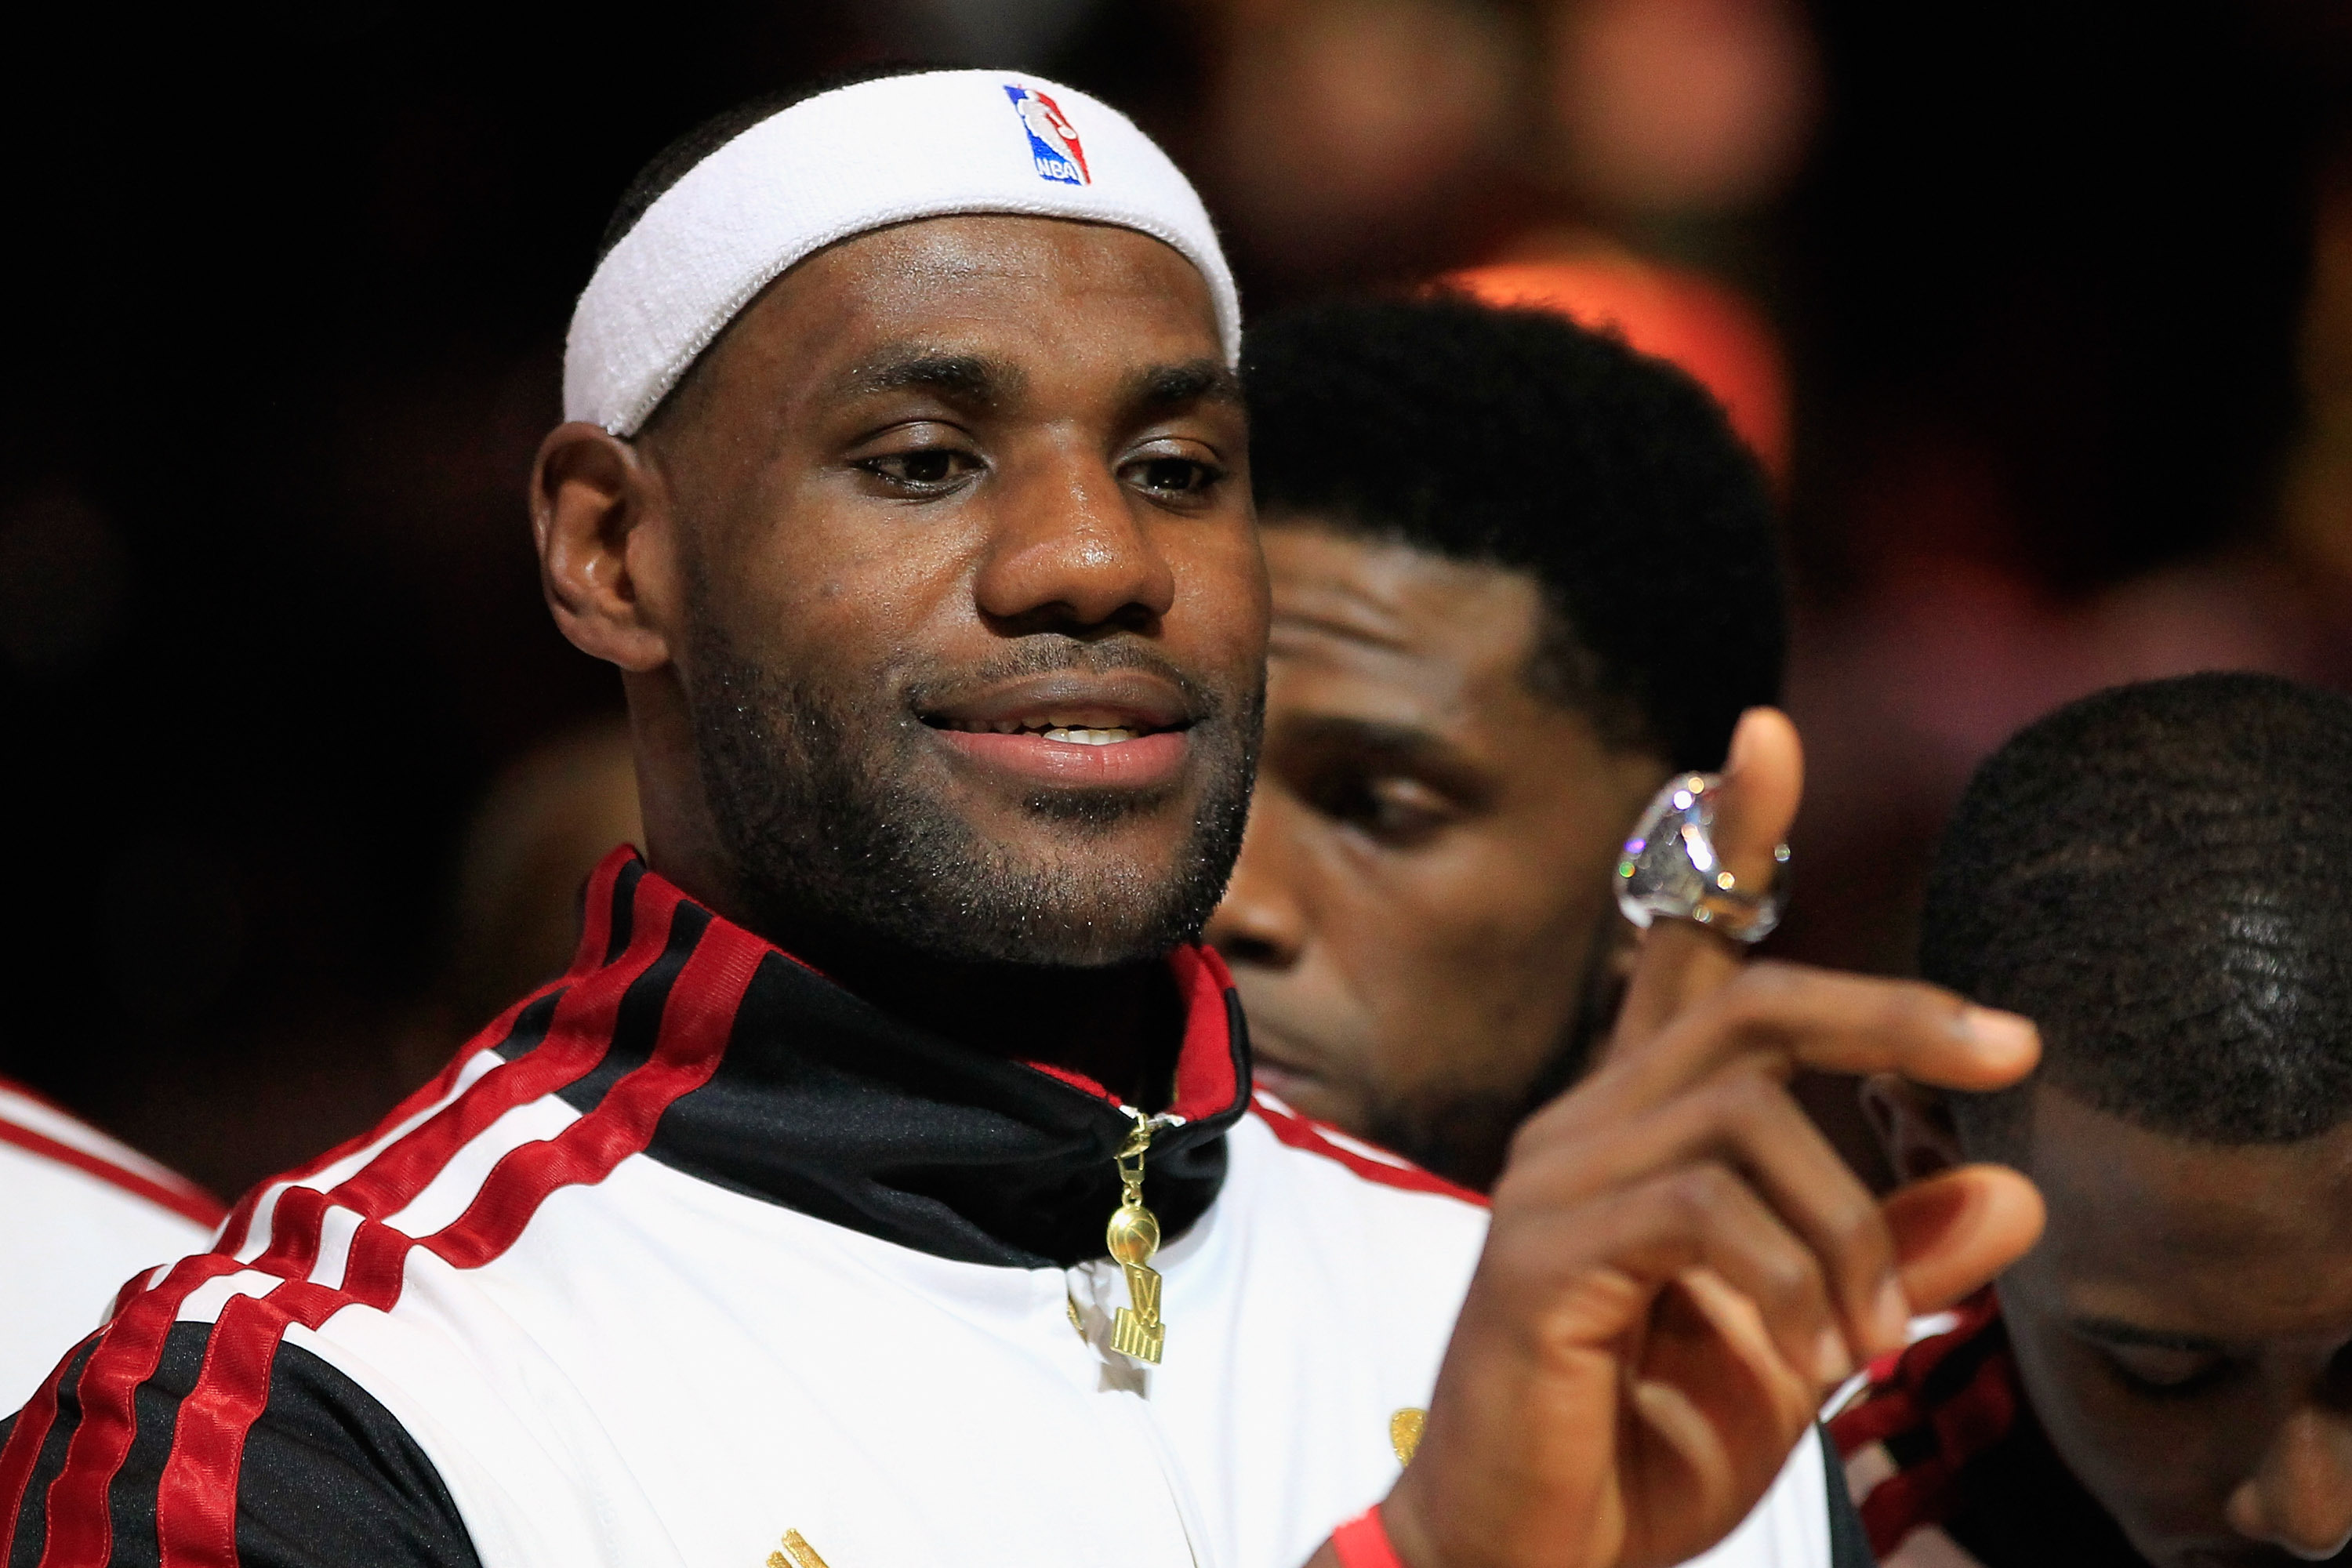 The Year in Review 2012: LeBron James has huge year, wins NBA